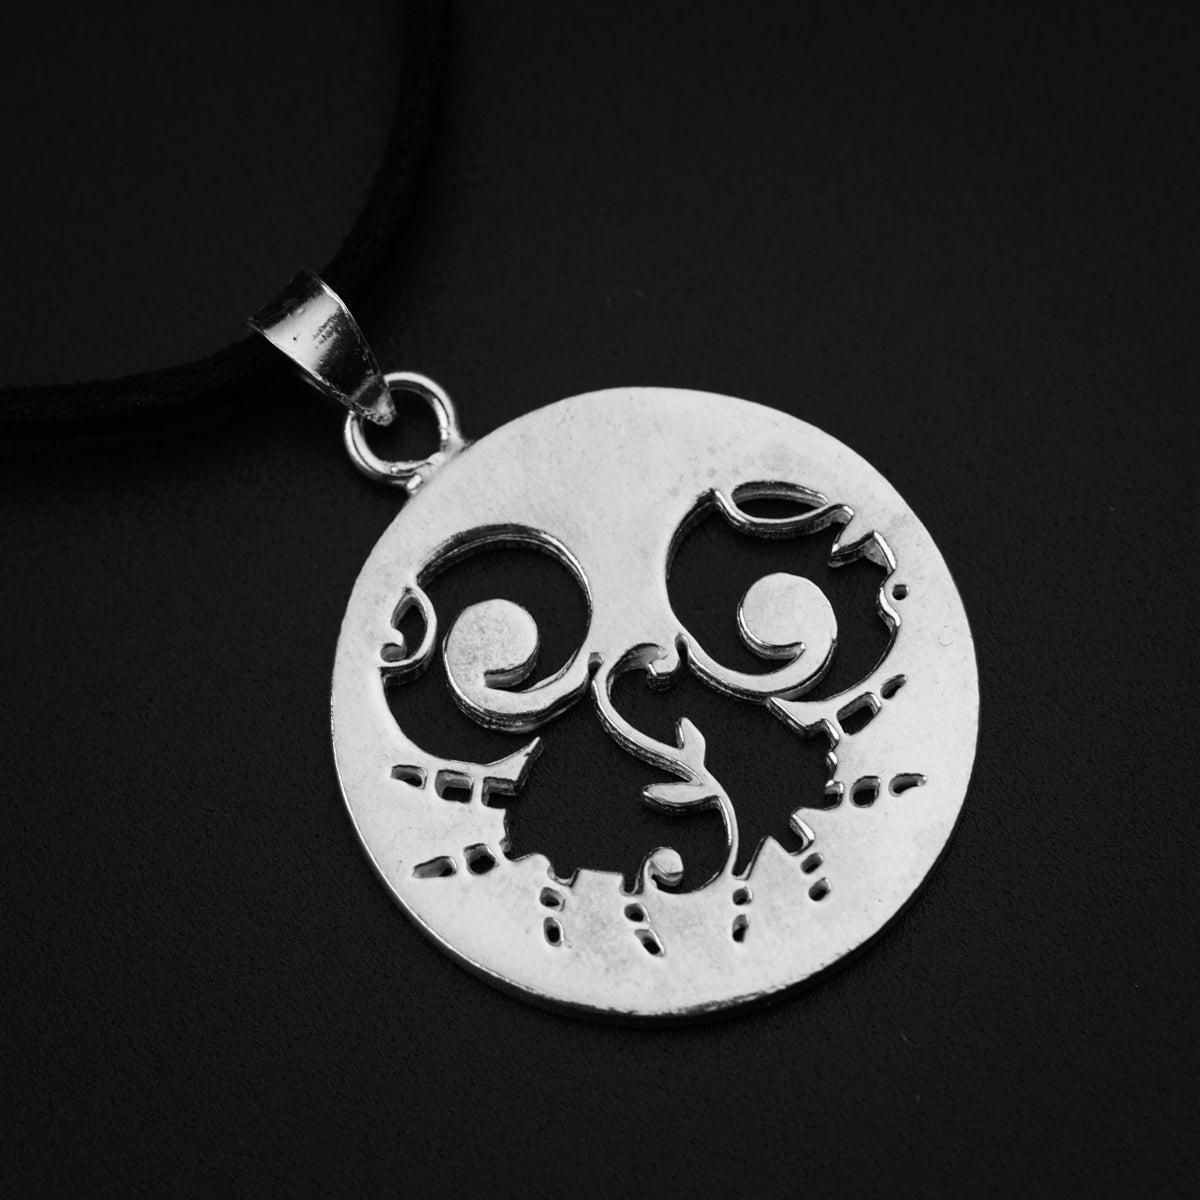 a silver pendant with a face on a black background